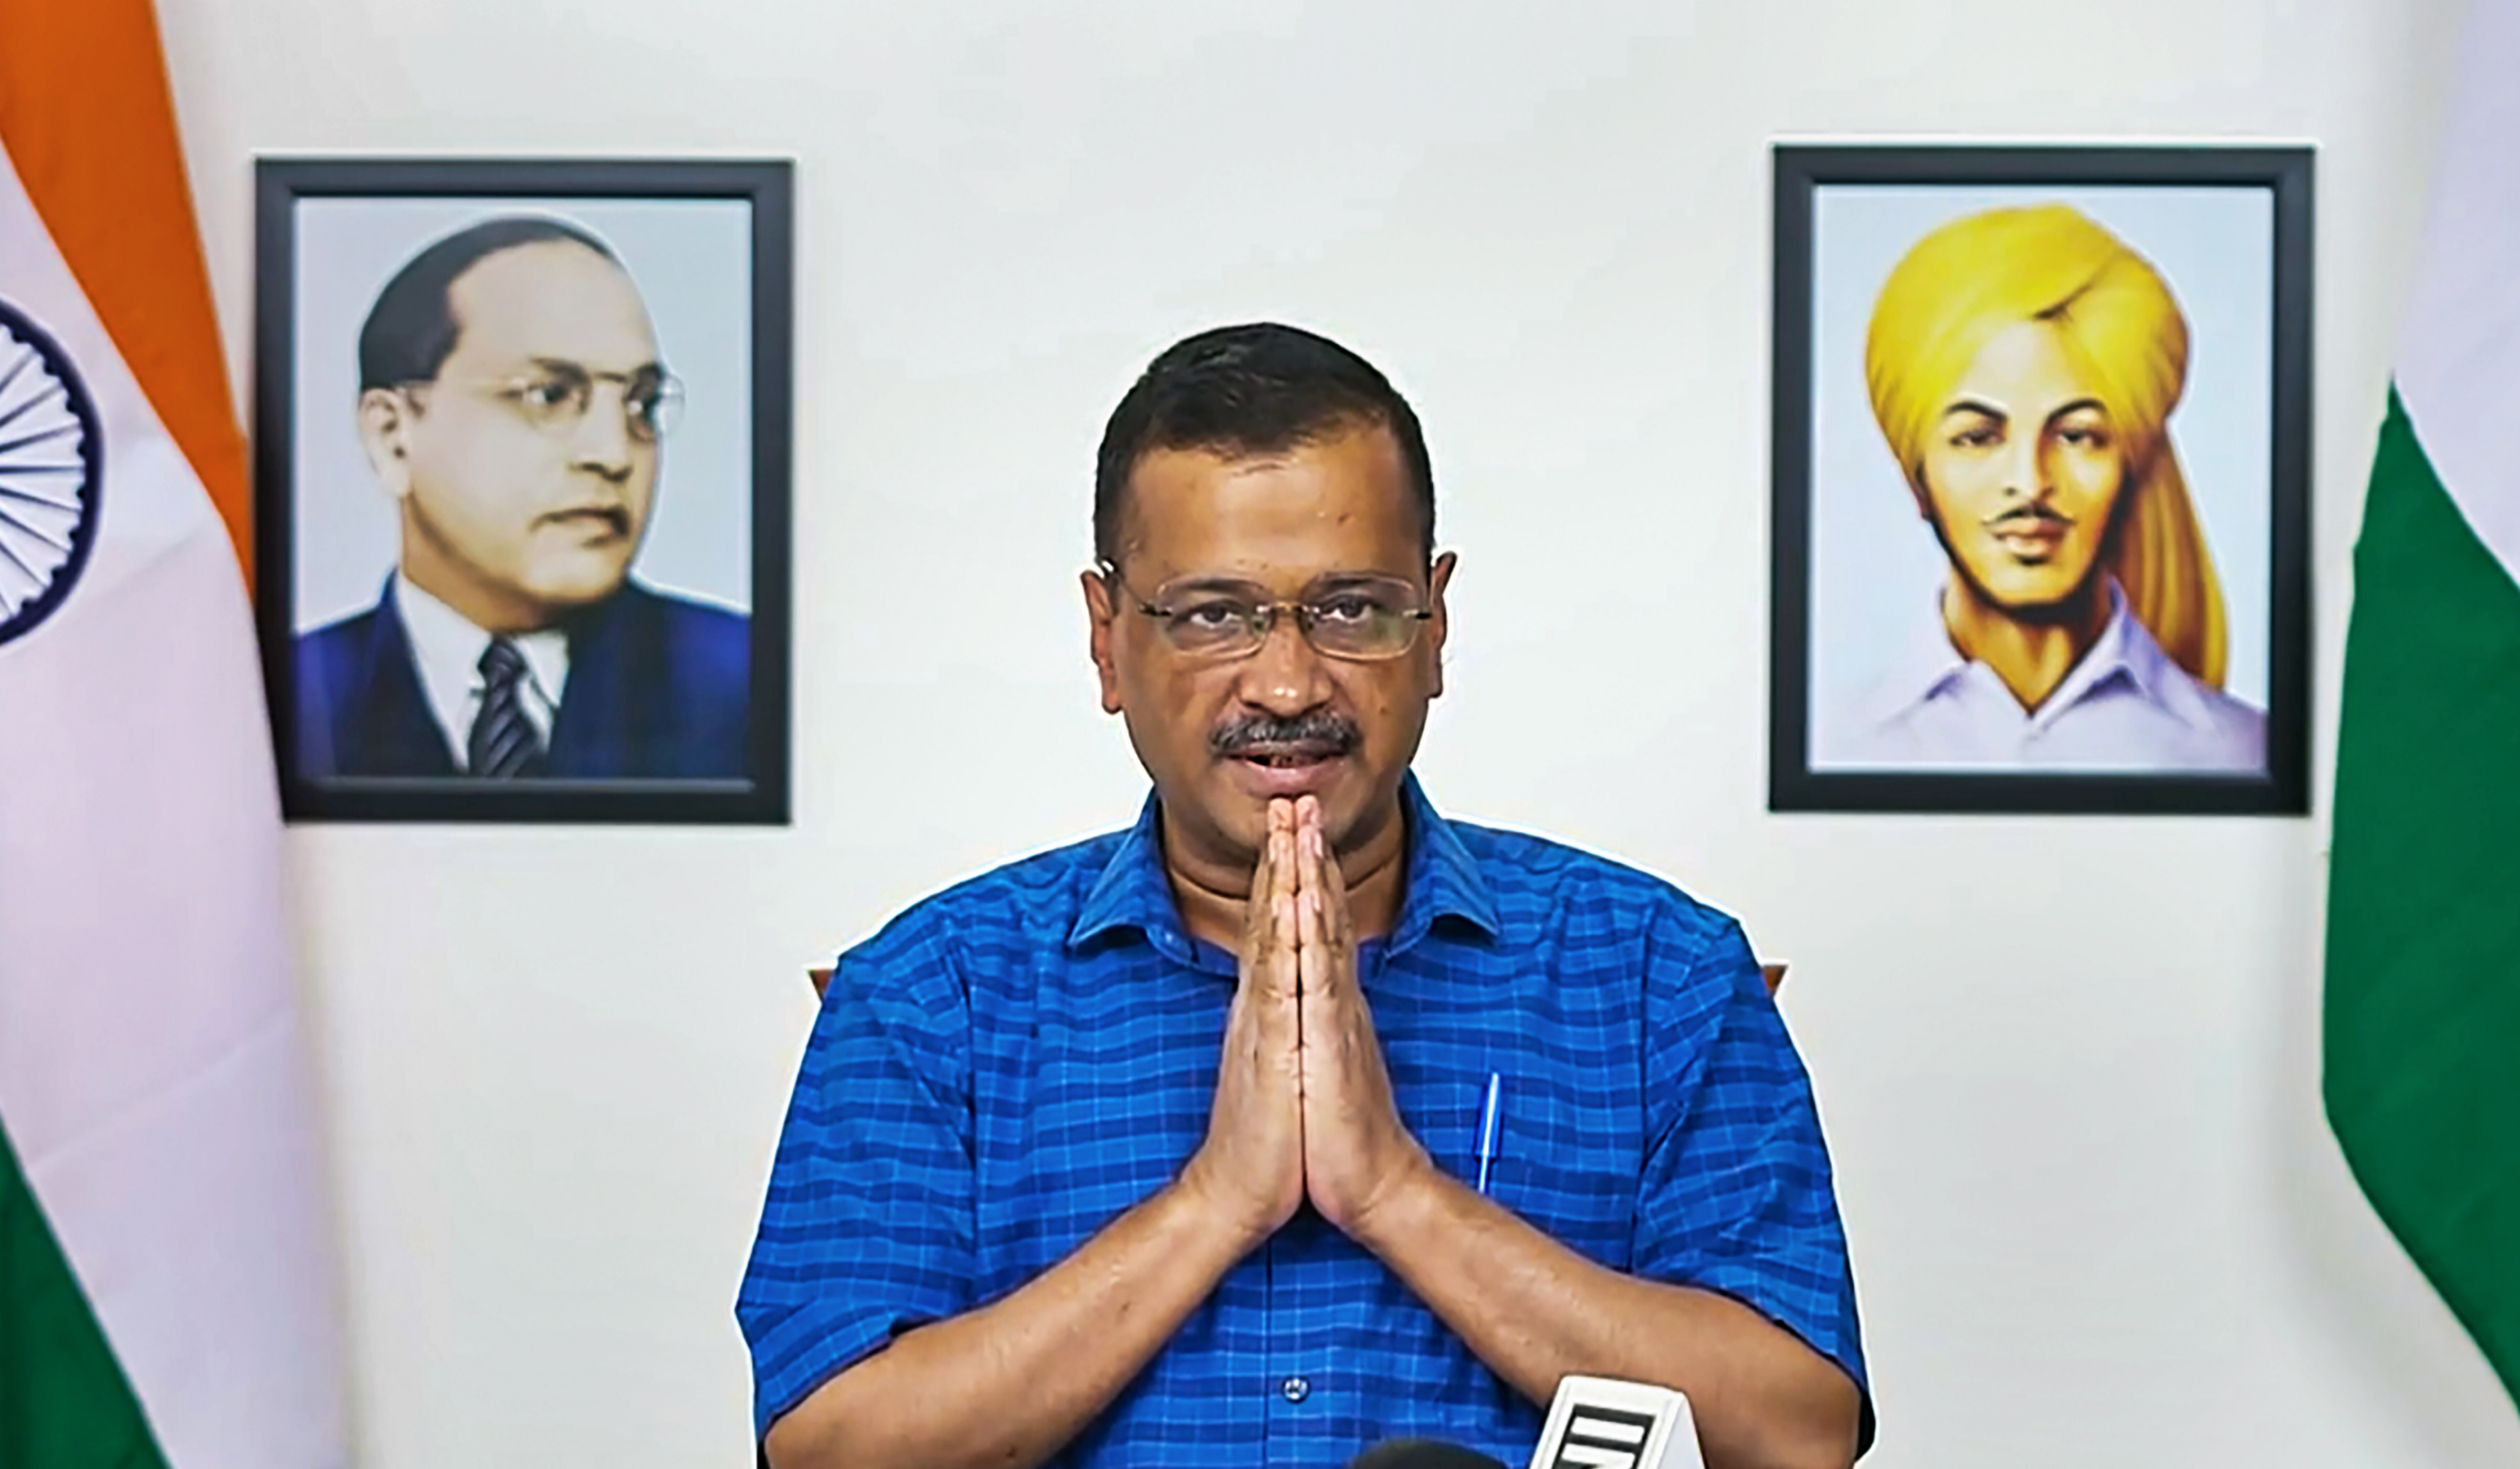 **EDS: SCREENSHOT FROM A VIDEO POSTED BY @ArvindKejriwal ON THURSDAY, MAY 5, 2022** New Delhi: Delhi Chief Minister Arvind Kejriwal during a virtual press conference, in New Delhi. (PTI Photo) (PTI05_05_2022_000163B)